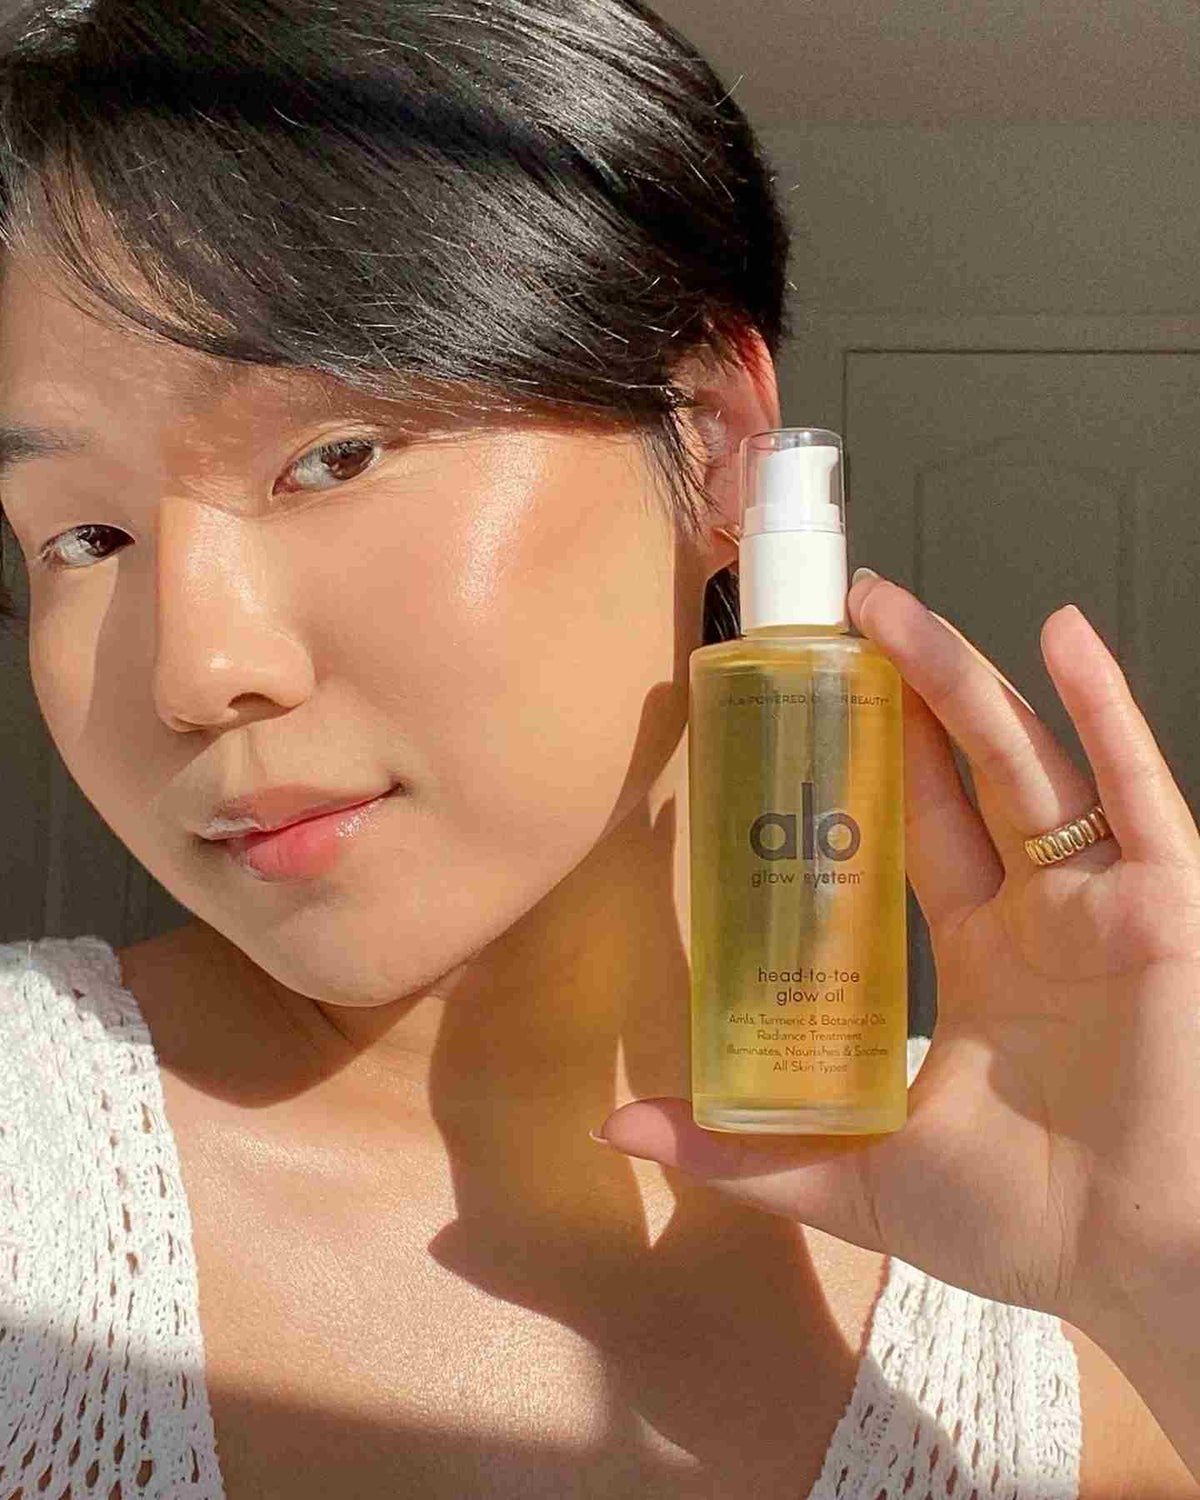 @ekunwoo holding a bottle of the Head-To-Toe Glow Oil with beautiful natural light hitting her face. 